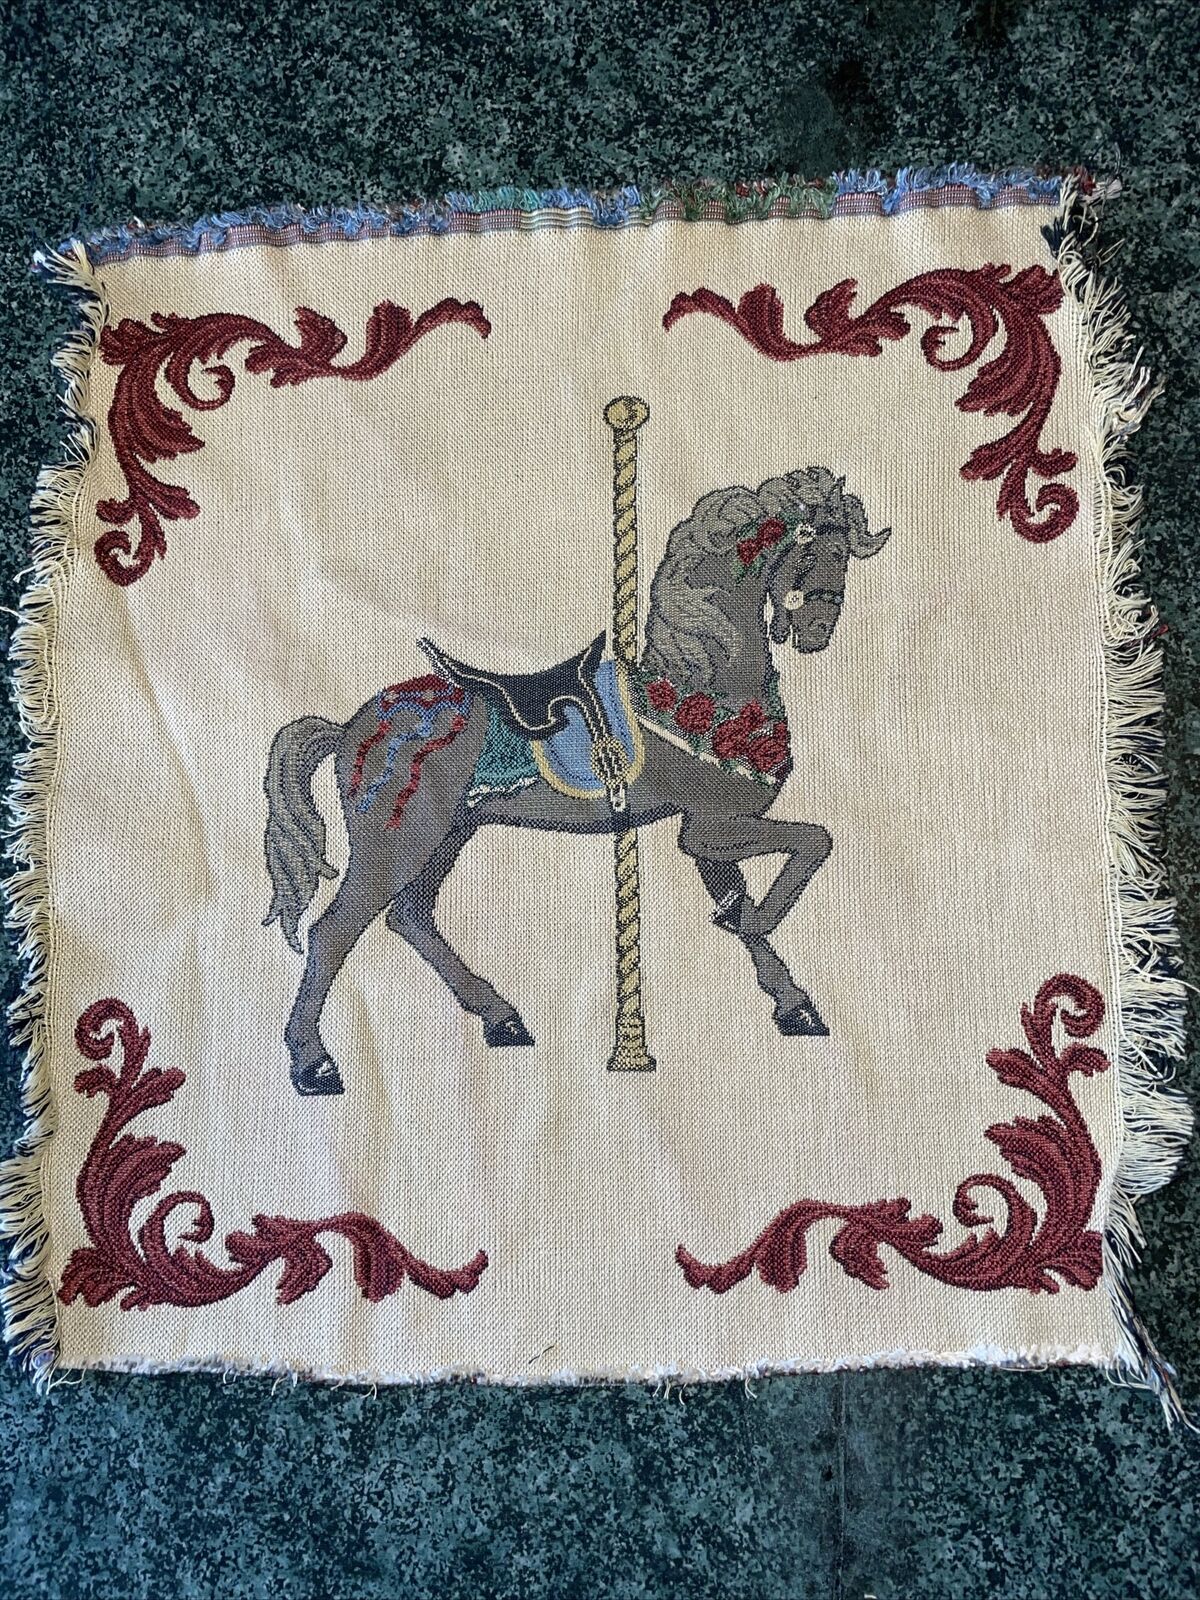 Vintage Carousel Horse Tapestry Cotton Fabric 17”x15” For Throw Pillow /picture